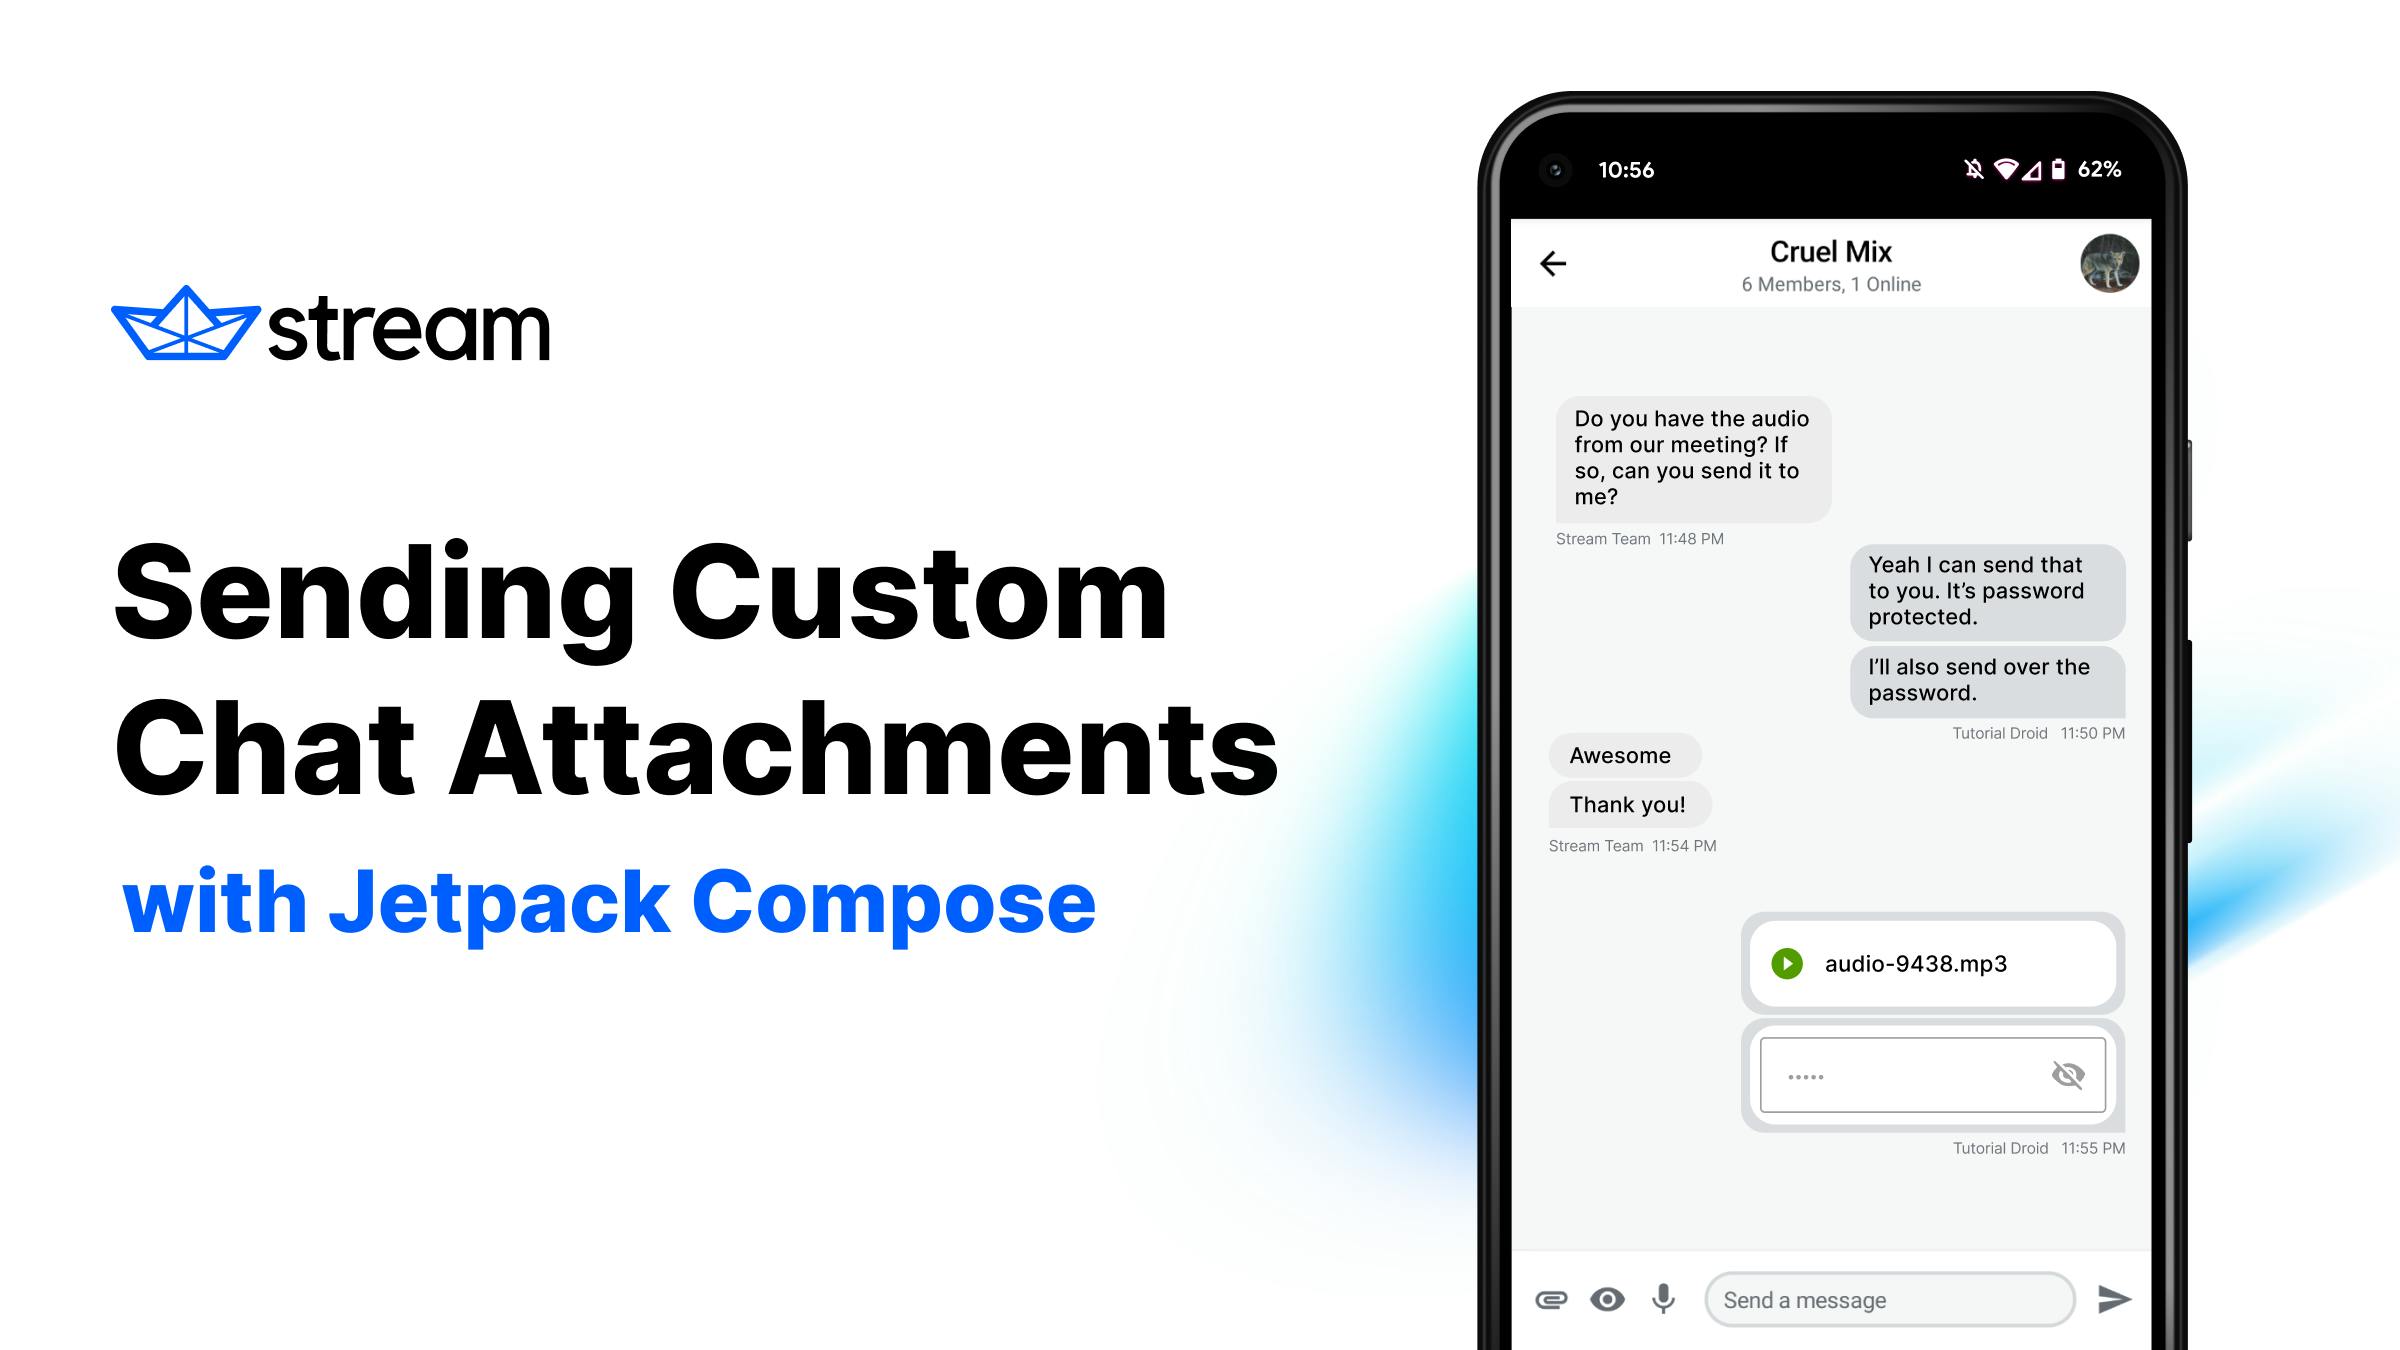 Sending custom chat attachments with Jetpack Compose